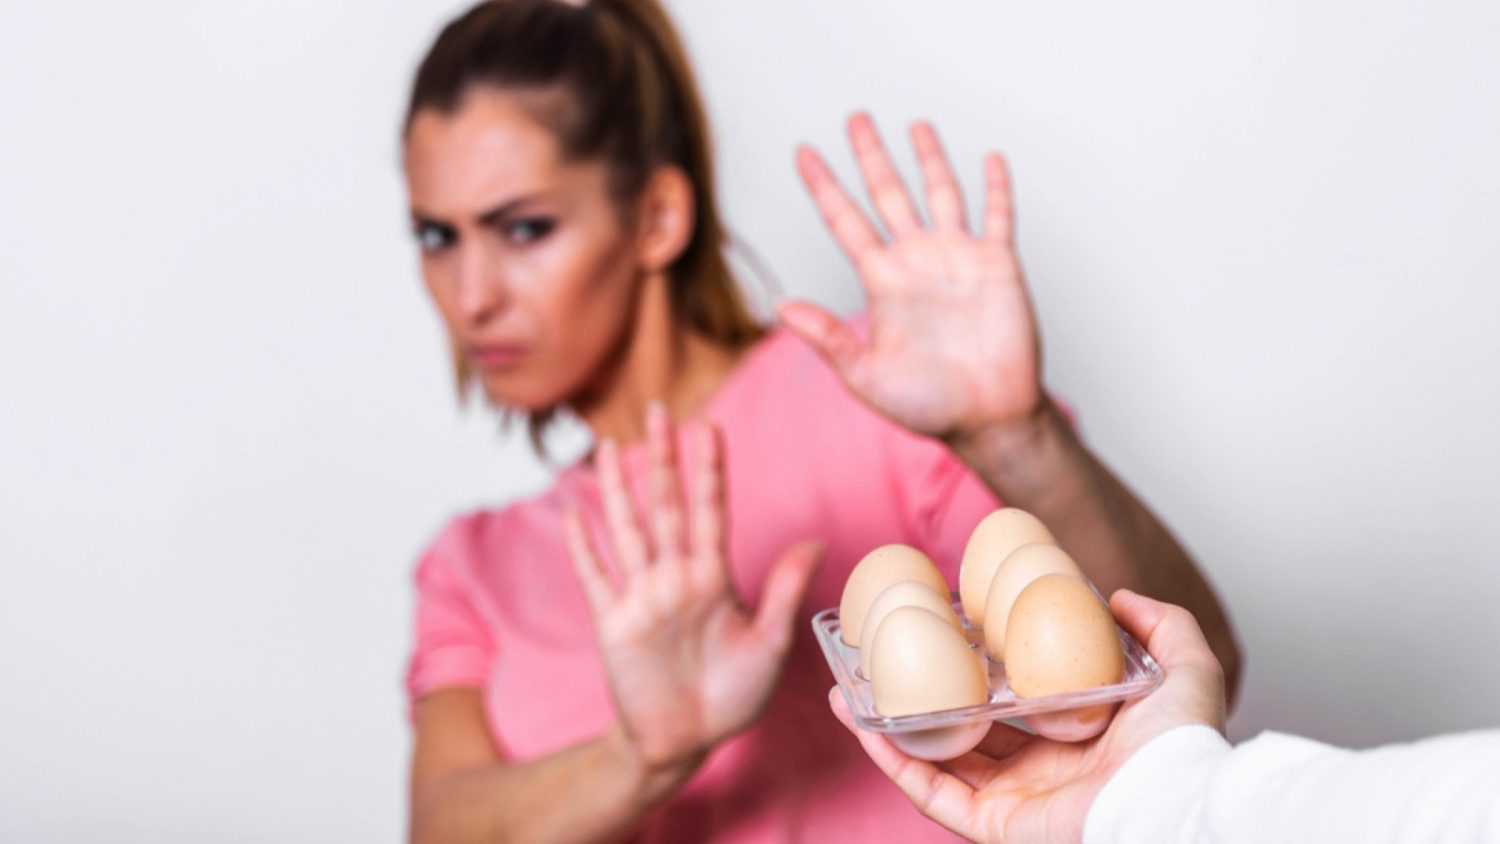 Woman saying no to raw eggs